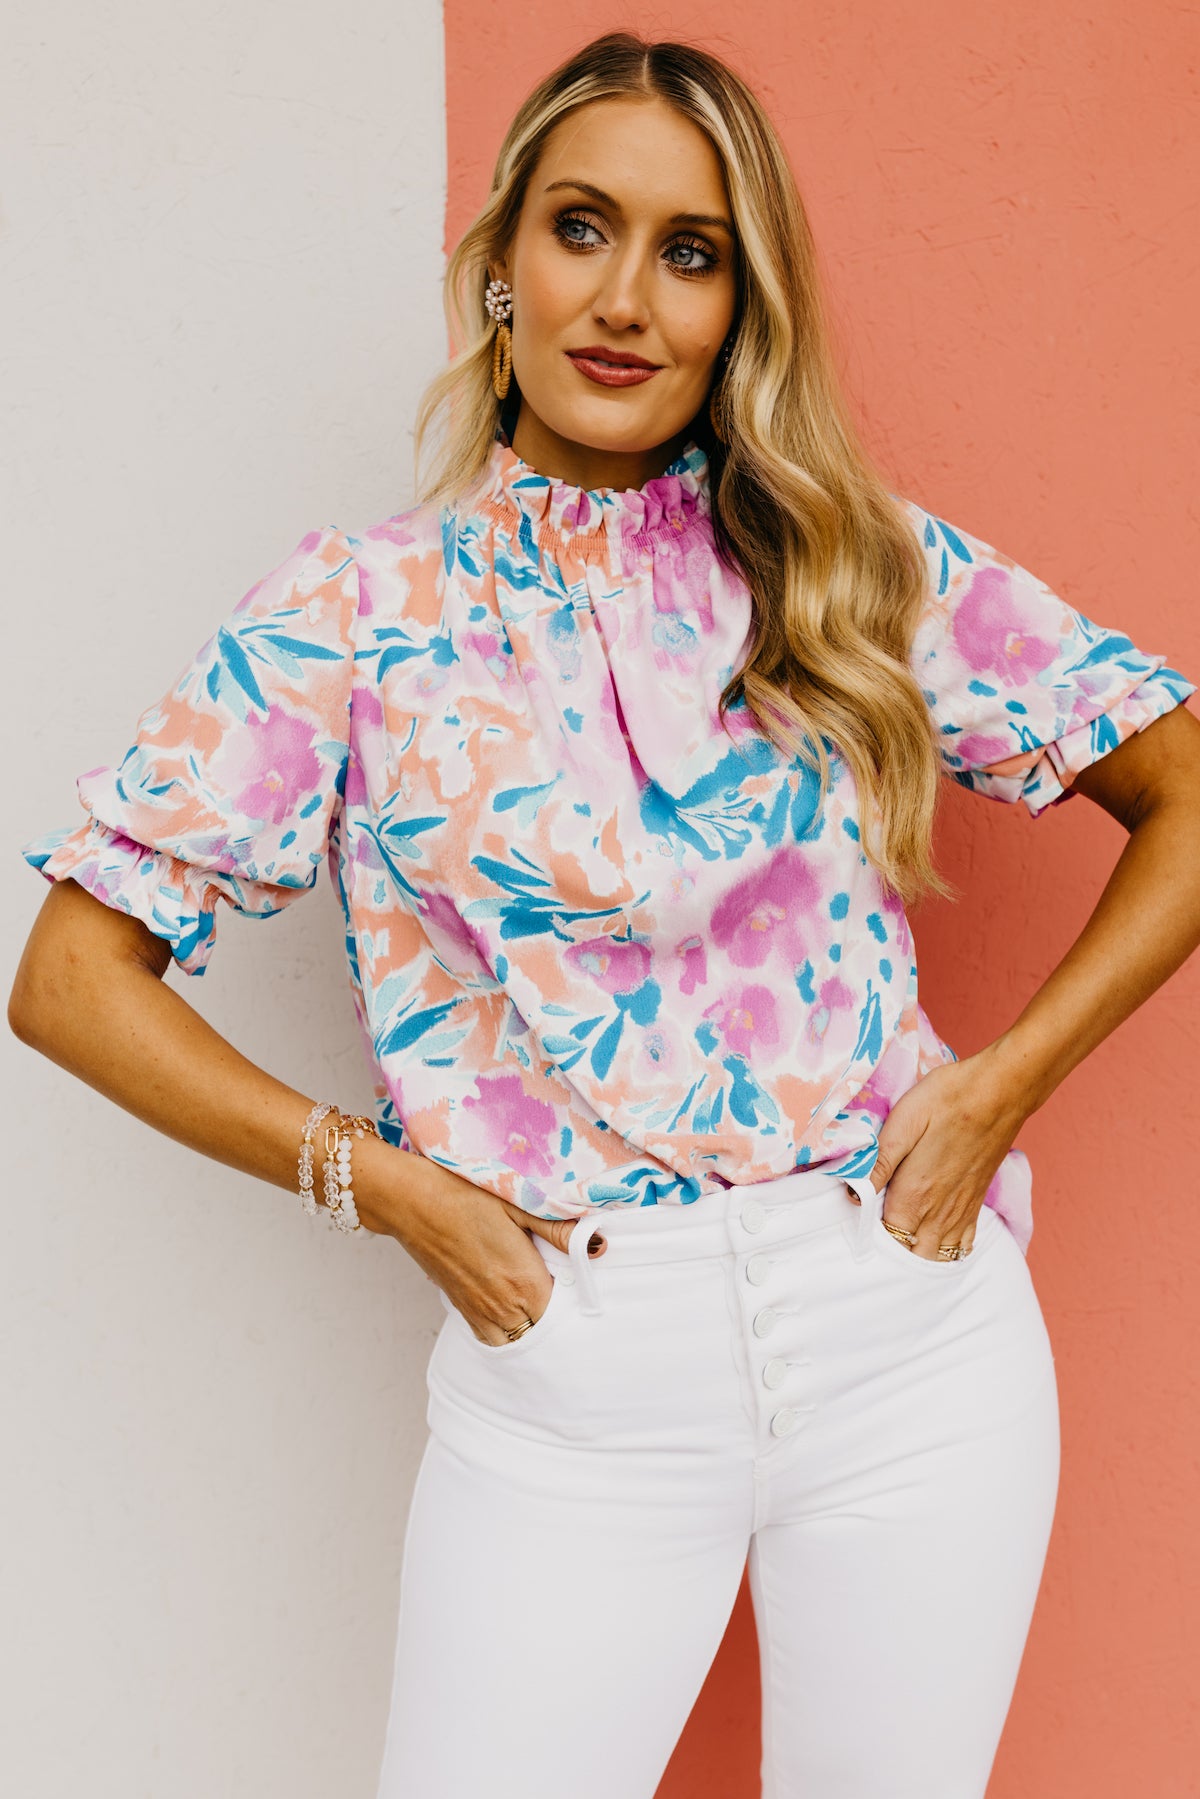 The Hanes Floral Blouse